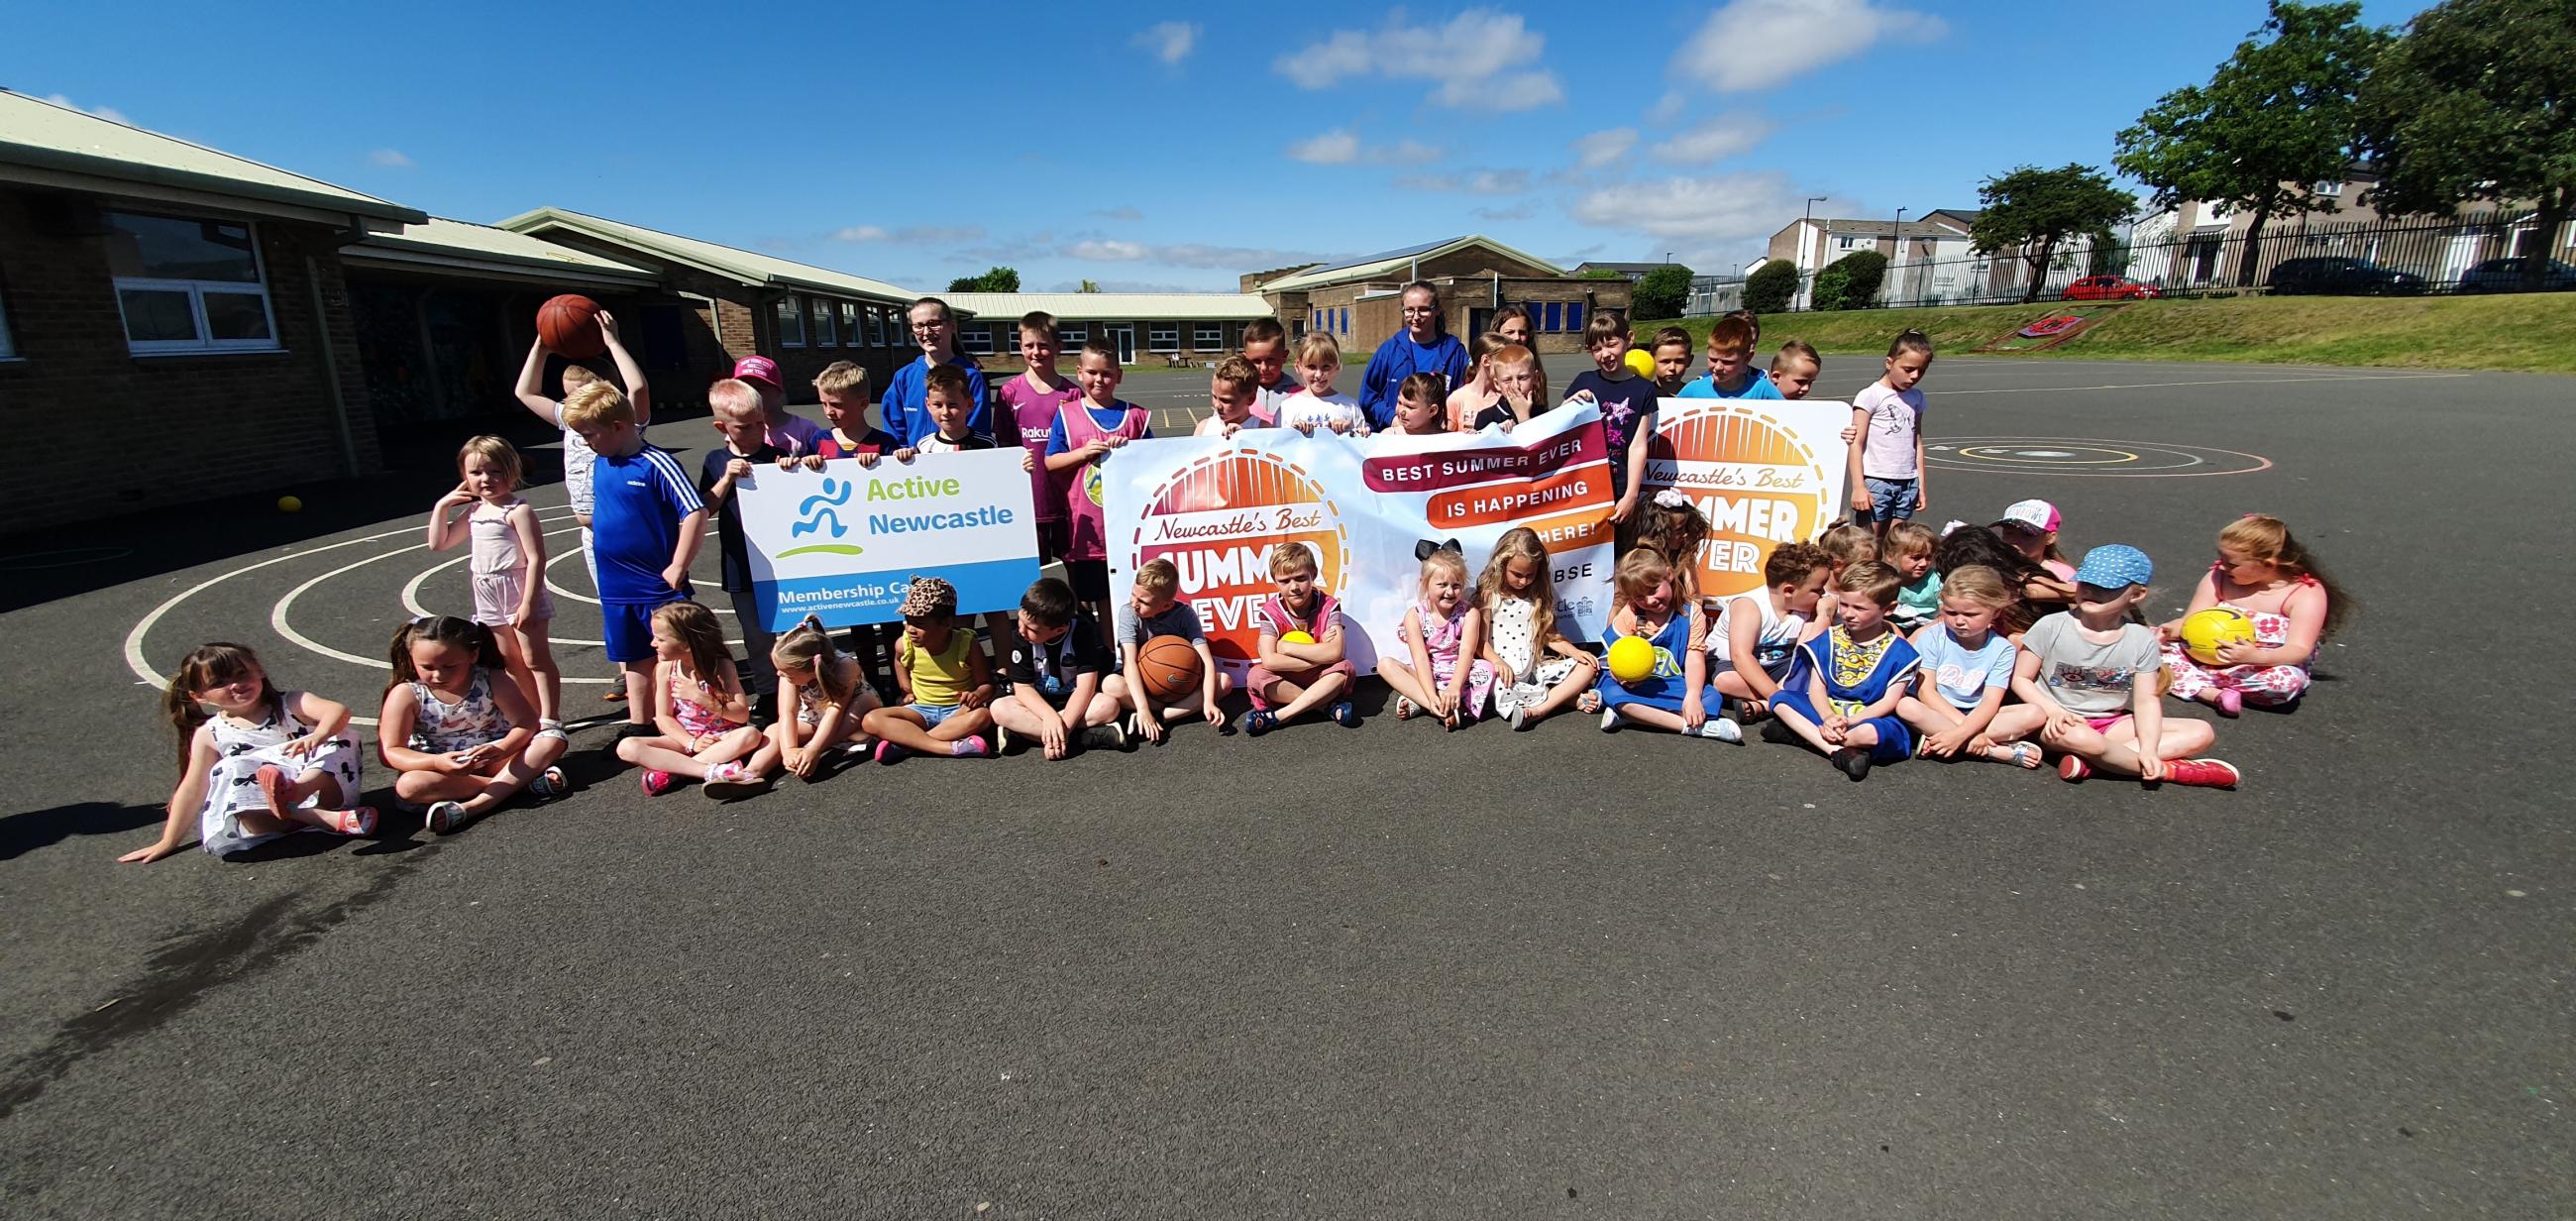 45 children attended the launch of Newcastle's Best Summer Ever at Blakelaw 